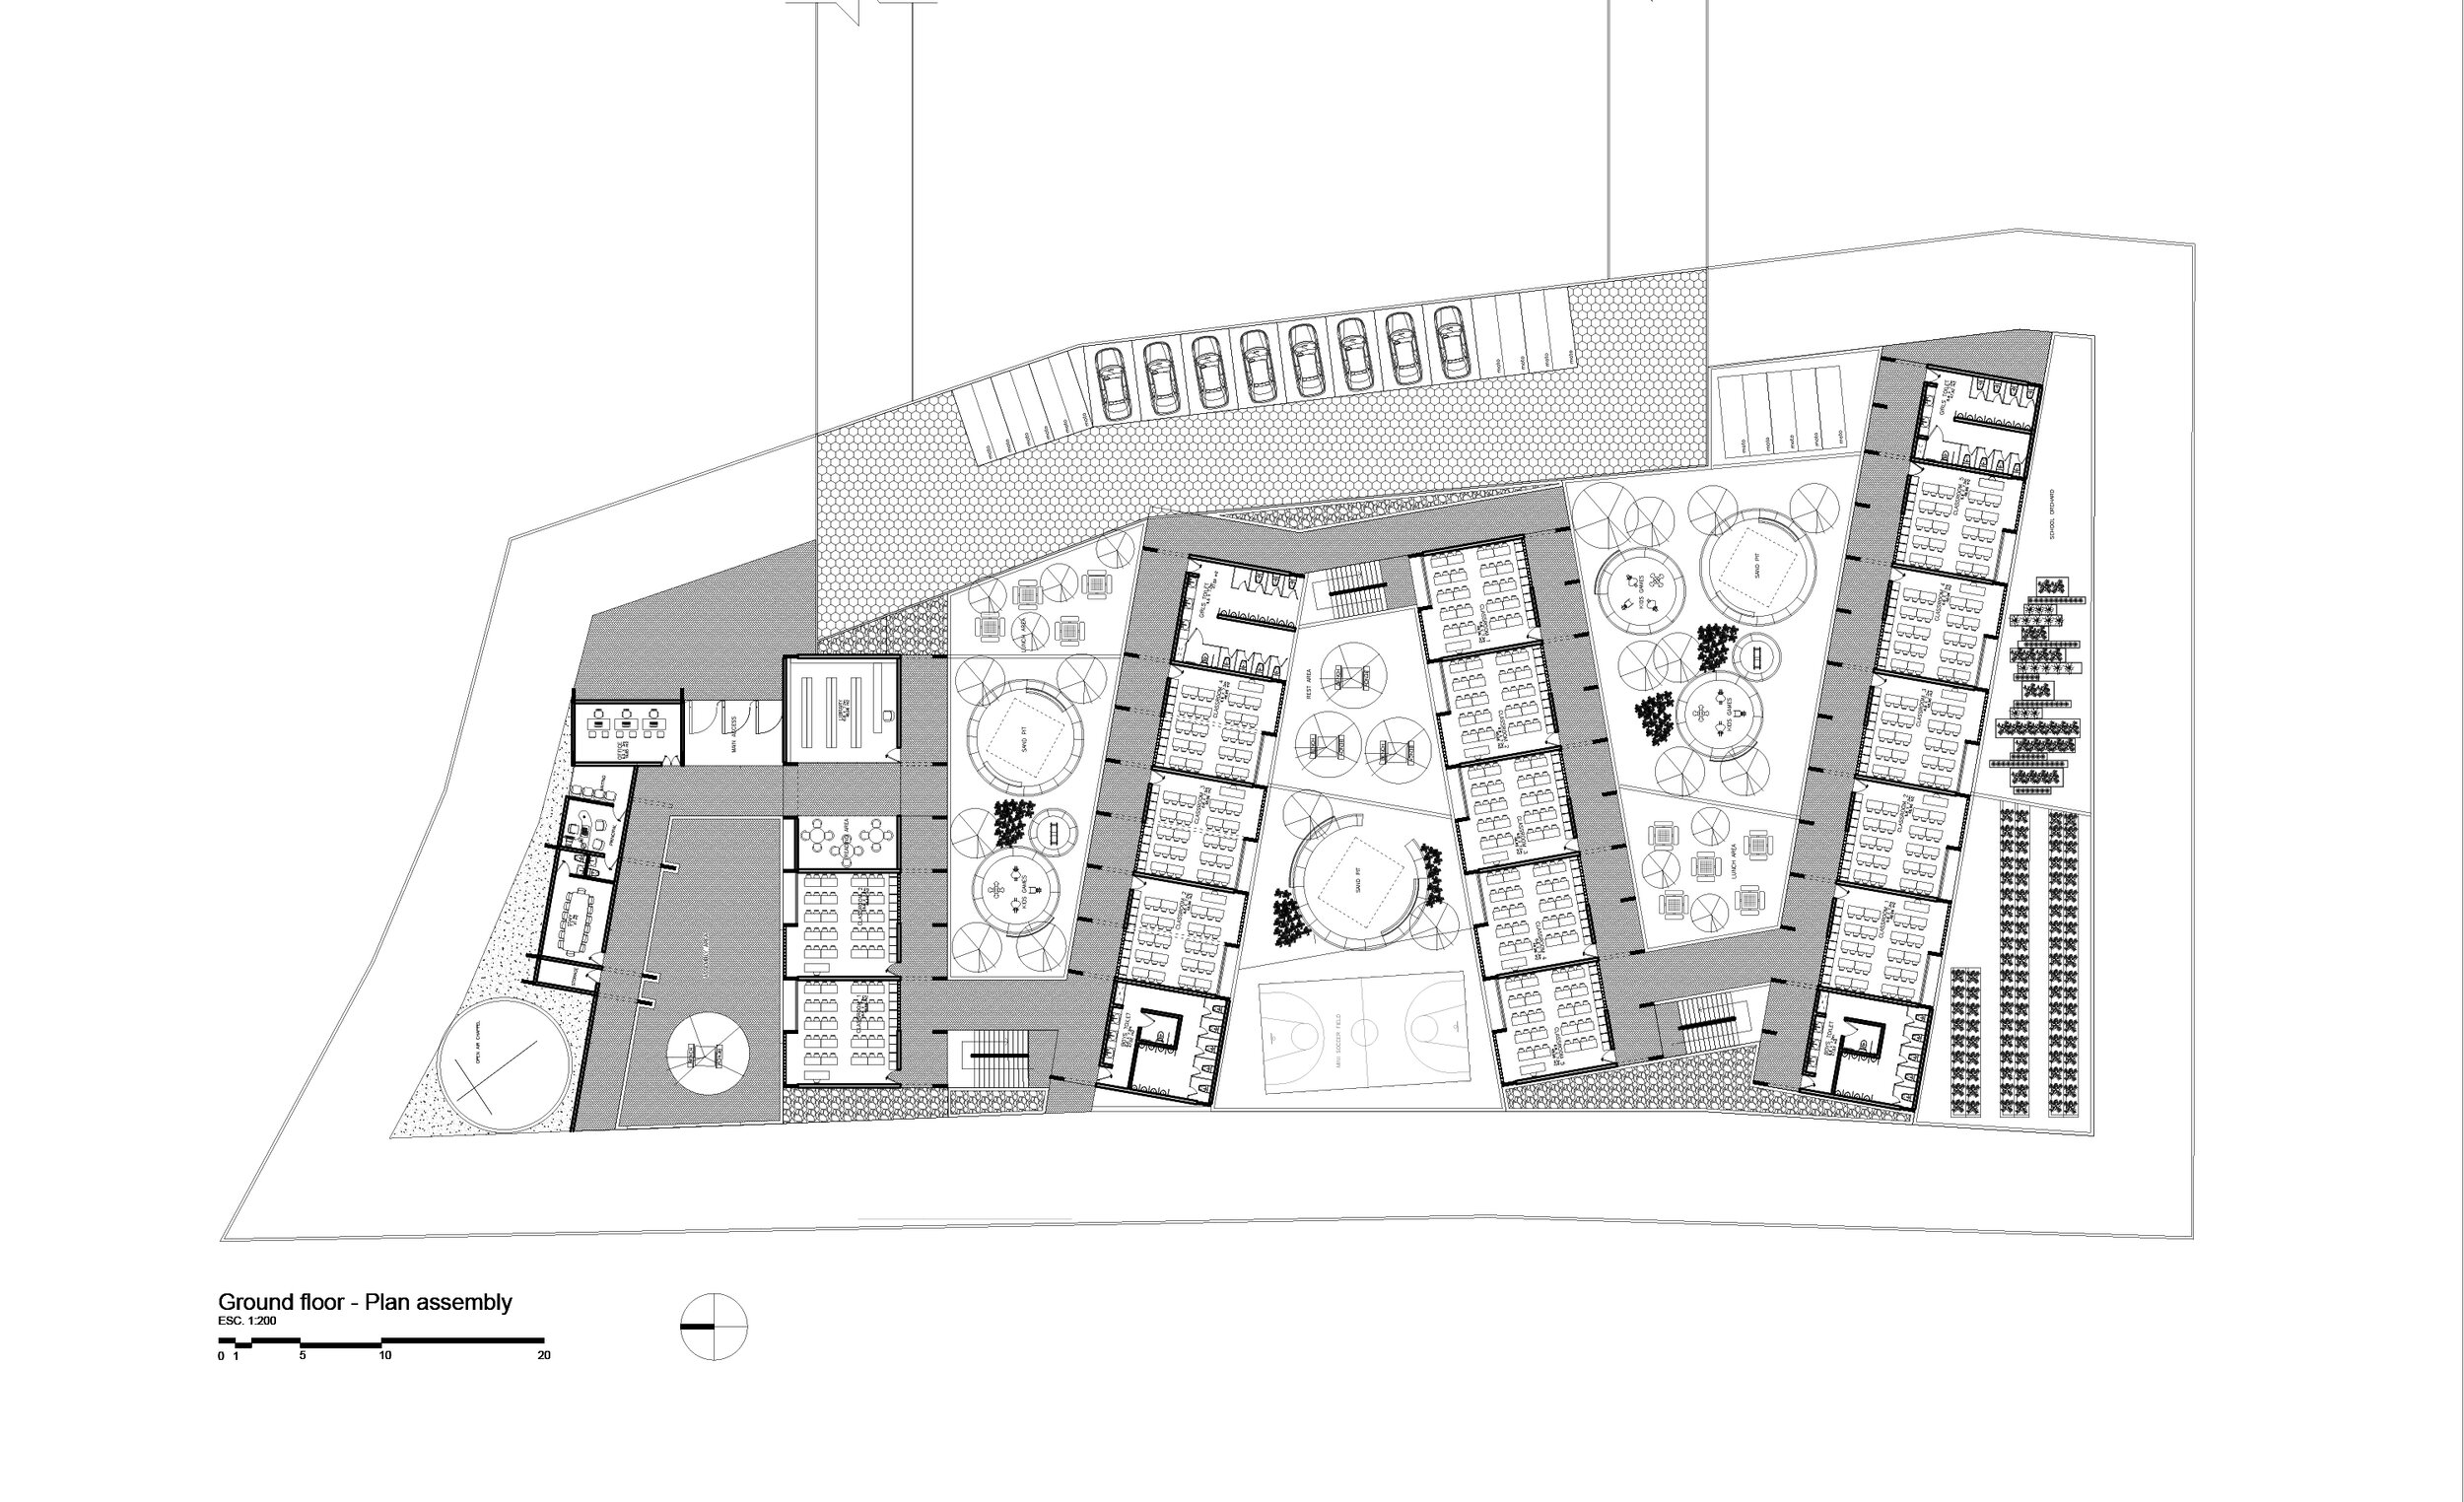 Sharon Primary School_Plan Assembly 190110-ARCH-01_GF-PLAN ASSEMBLY 4.jpg